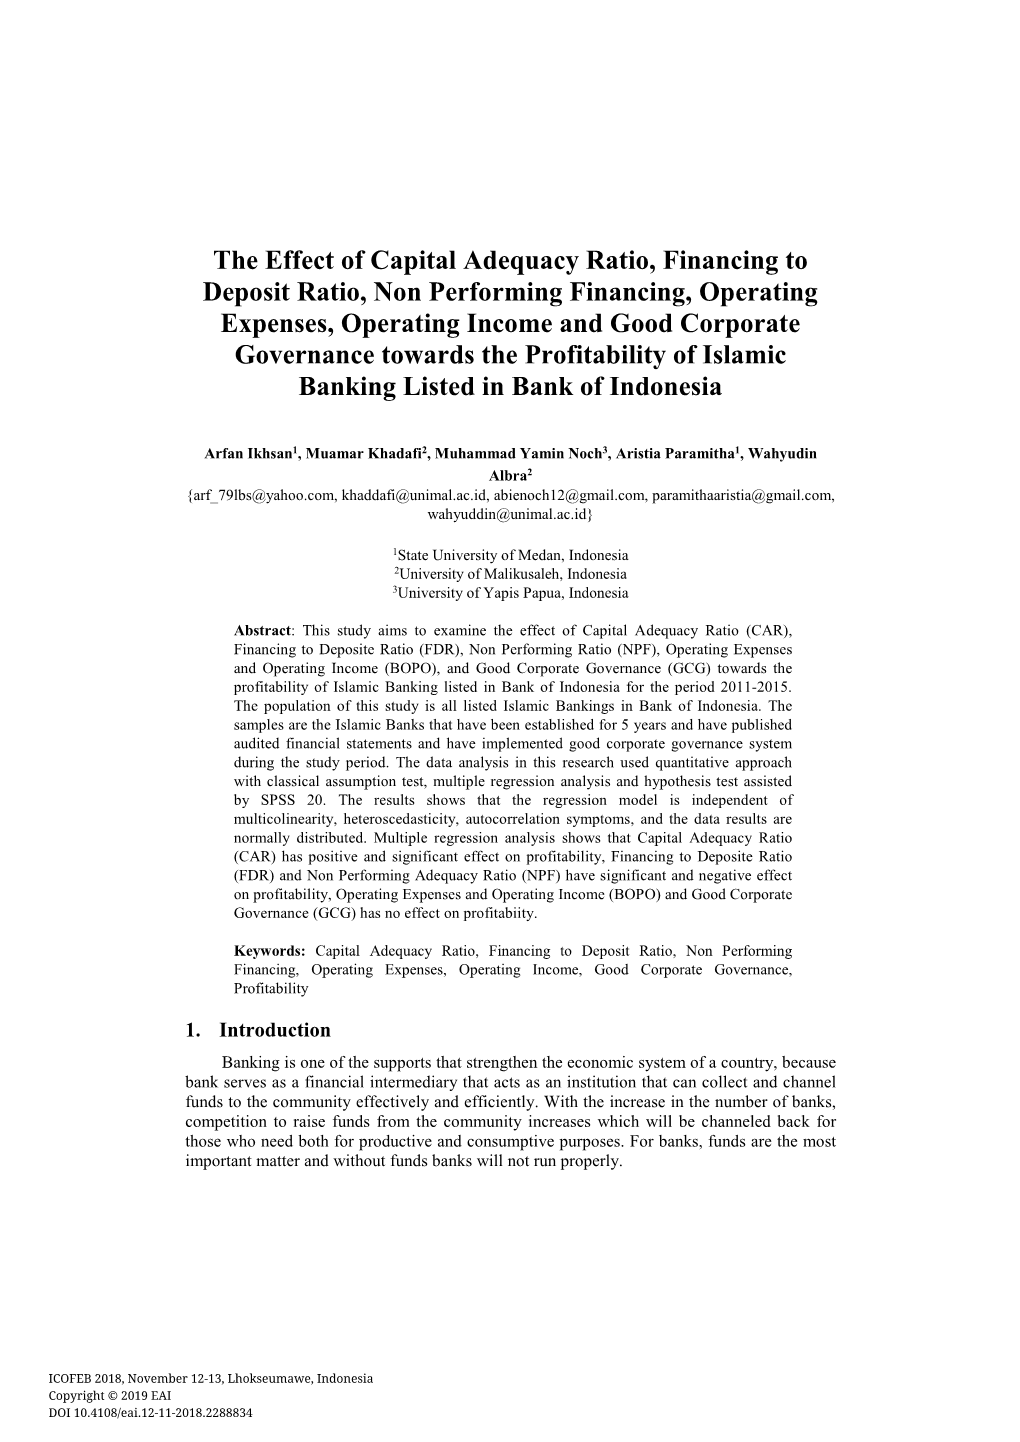 The Effect of Capital Adequacy Ratio, Financing To